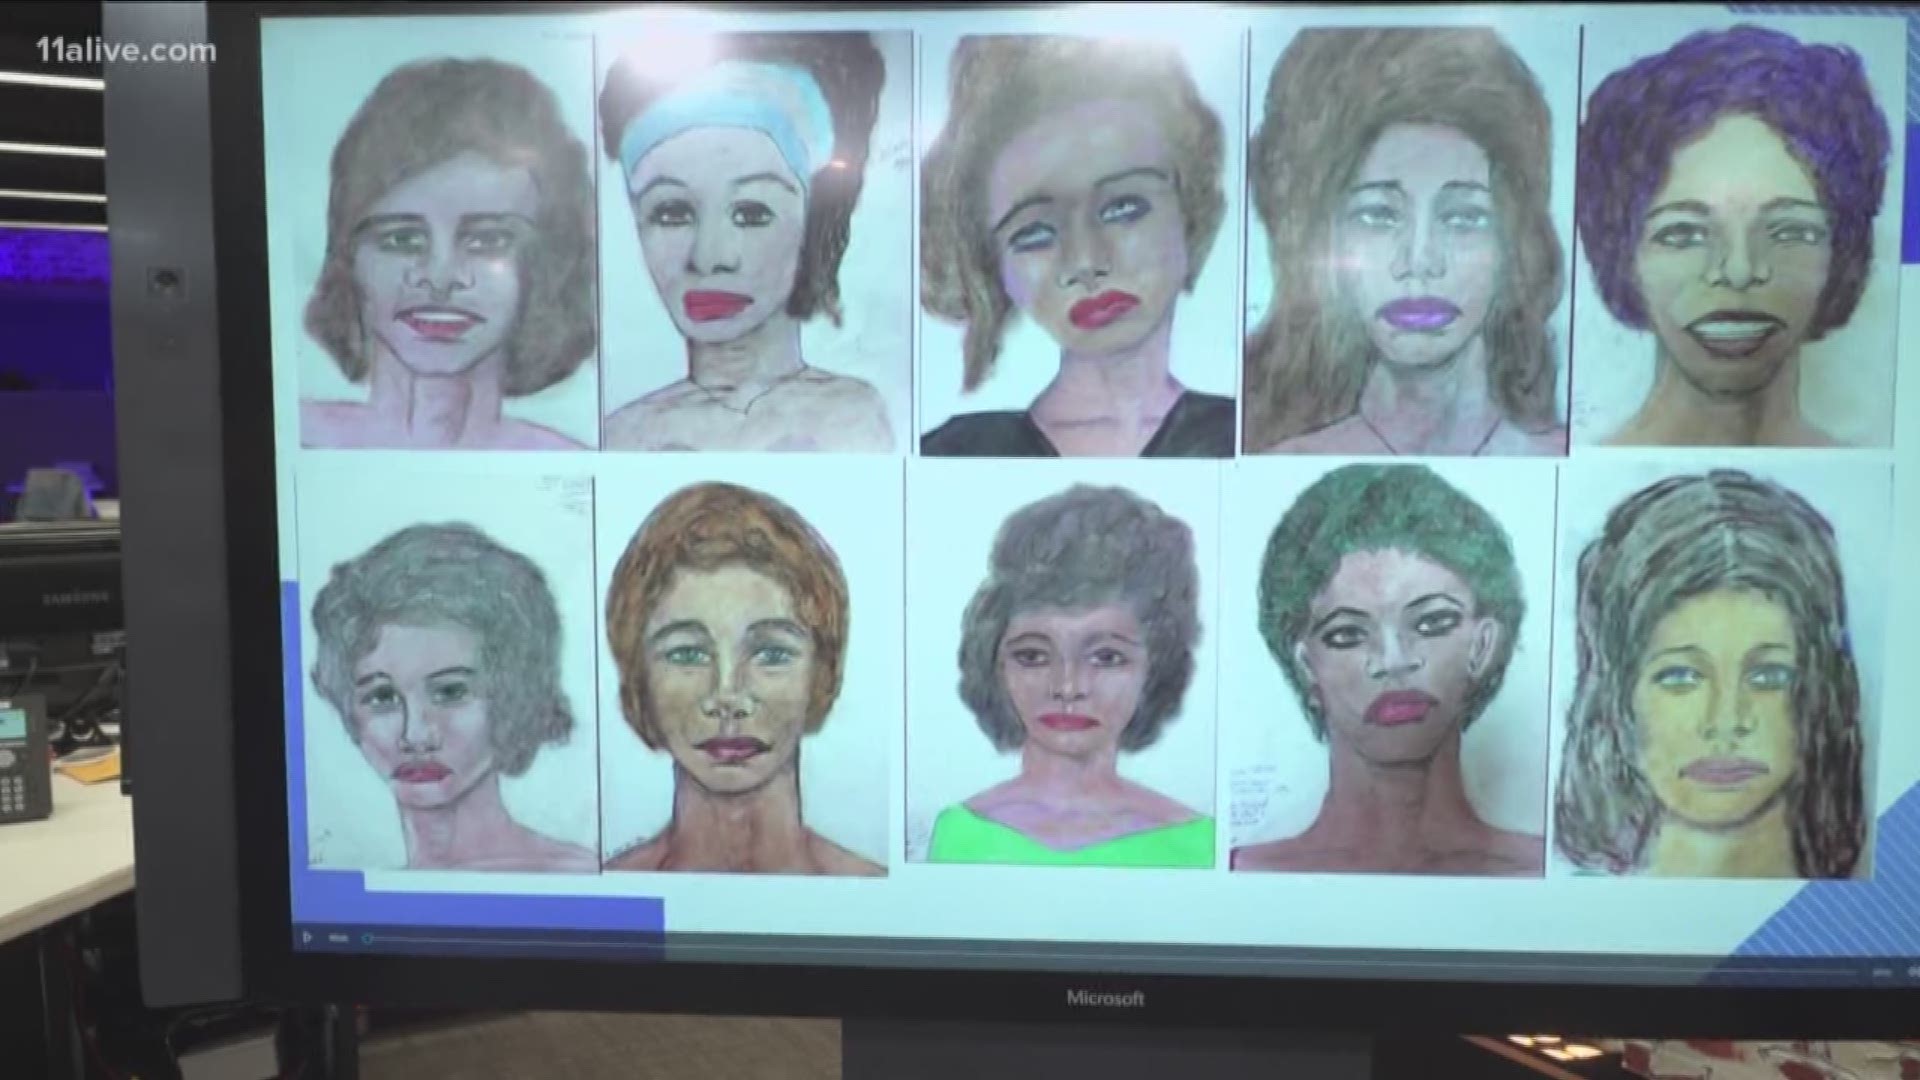 The FBI released the portraits this week, hoping some of Samuel Little's victims can be identified from them.